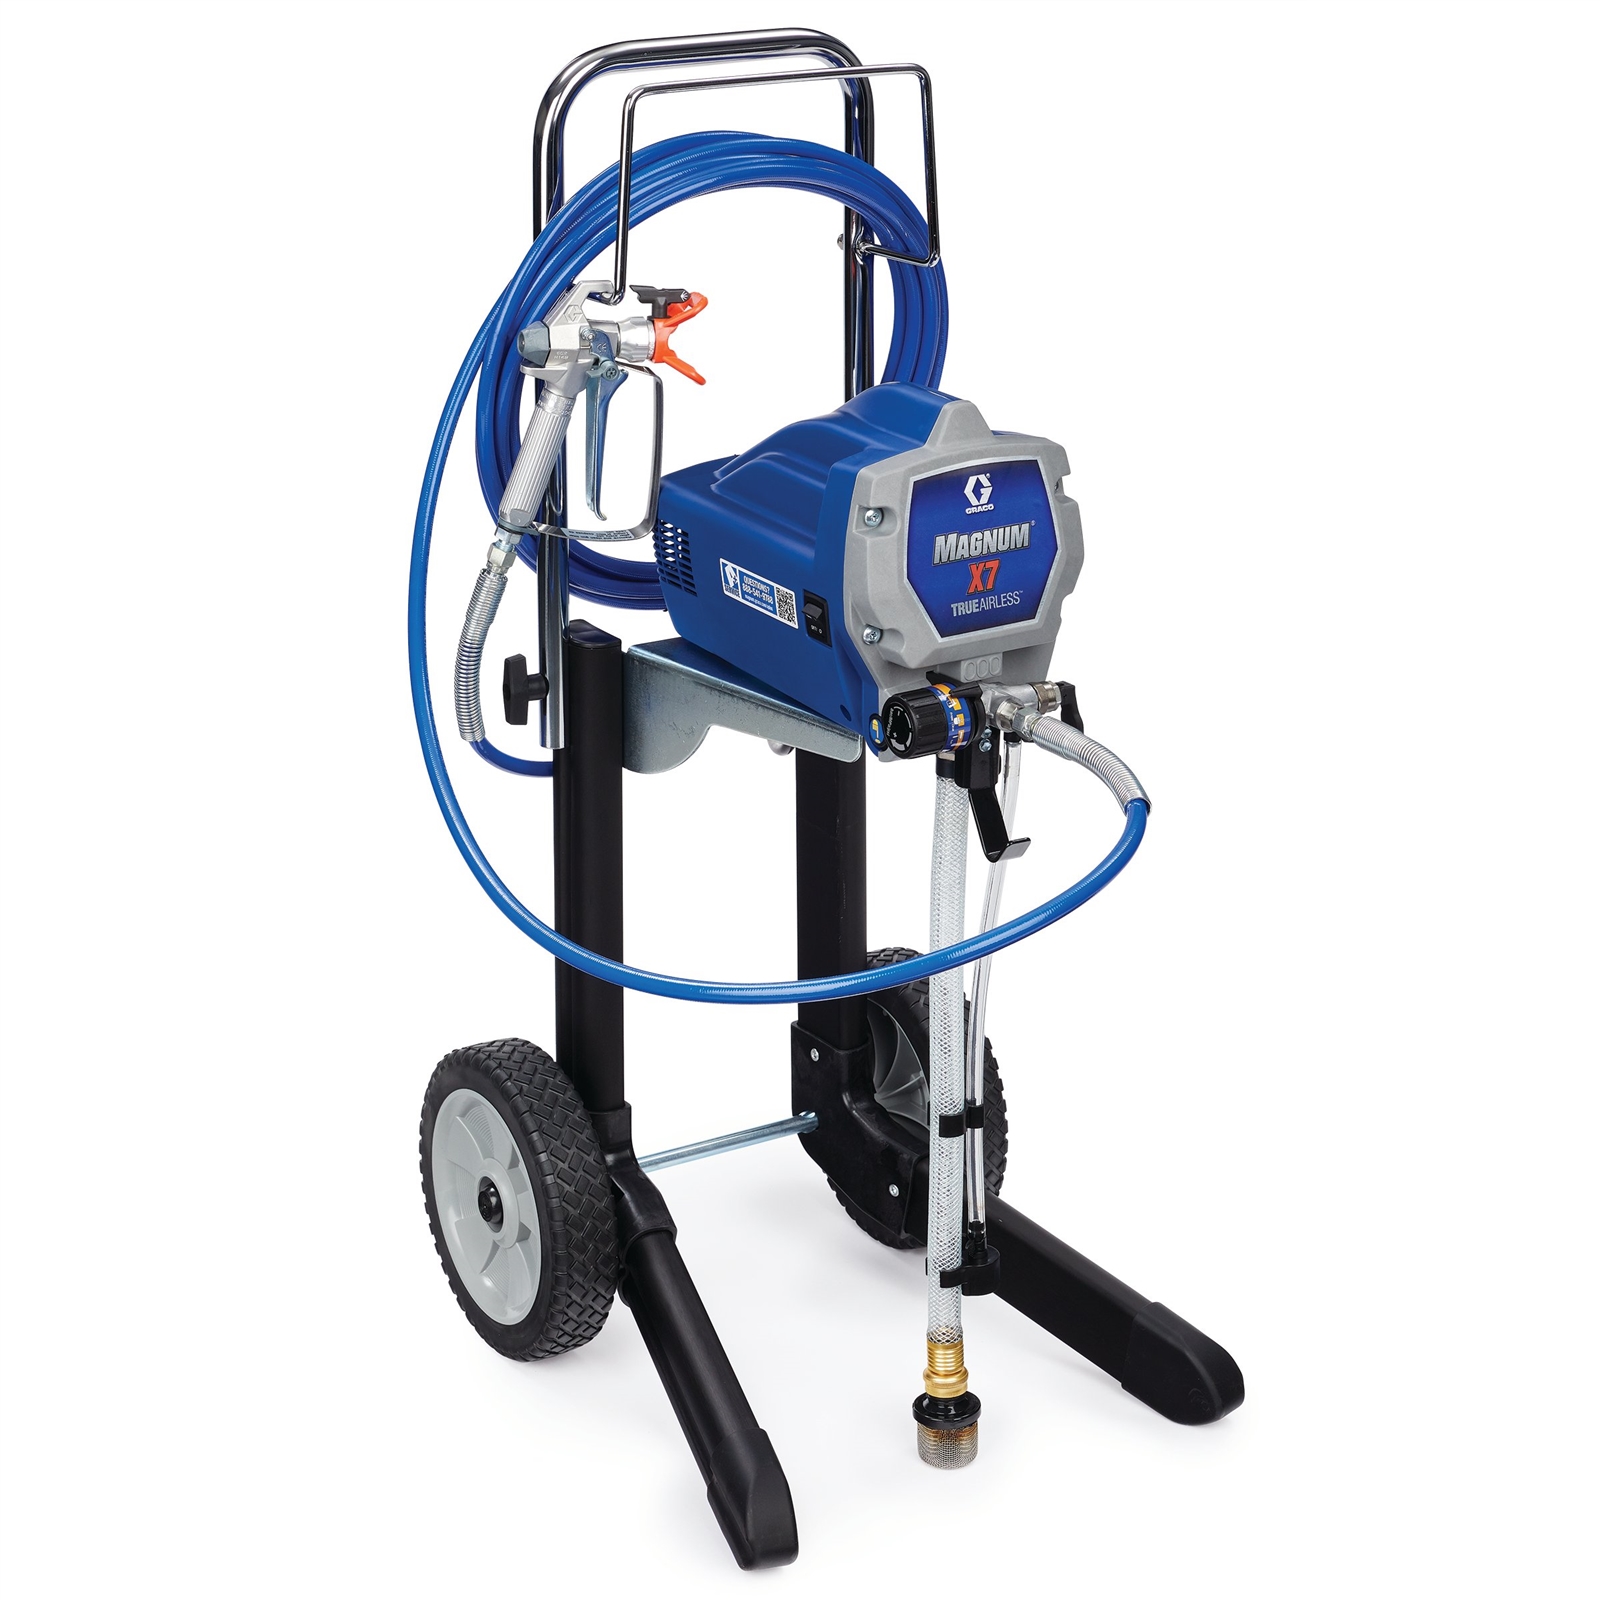 Graco Airless Paint Sprayer, 5/8 HP, 0.31 gpm Flow Rate, Operating  Pressure: 3000 psi